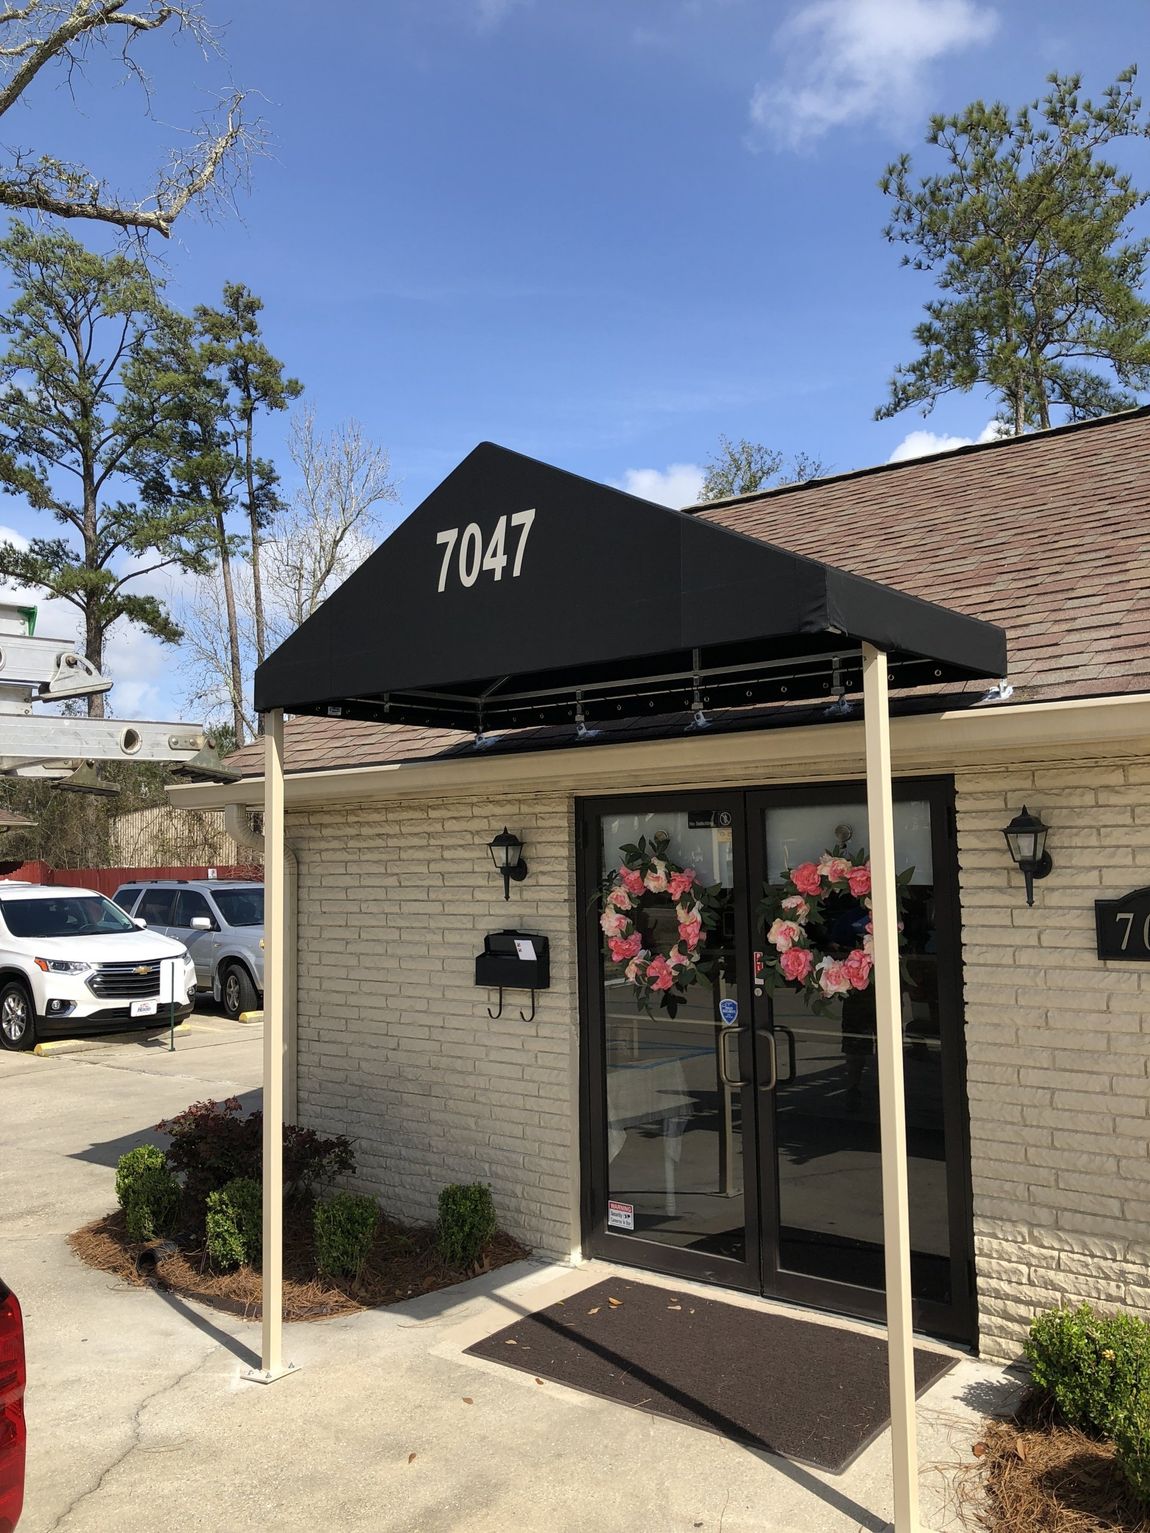 Canopy — Black Canopy With Signage in Chalmette, LA